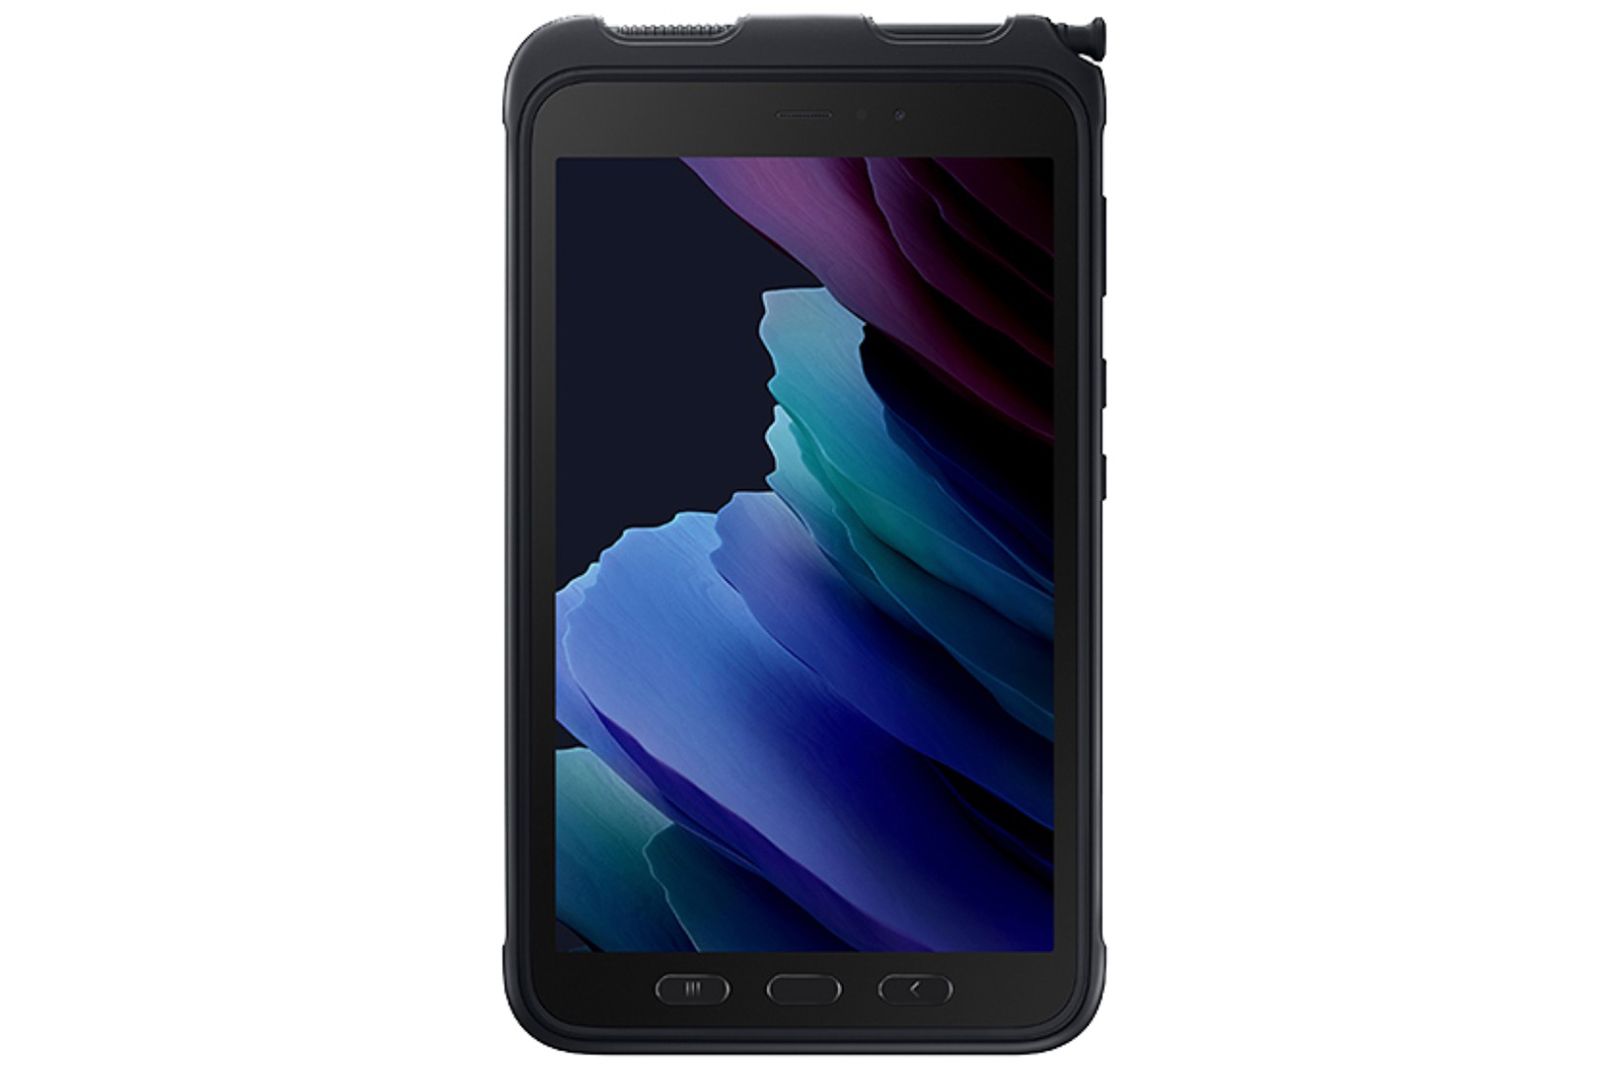 Samsung updates its rugged tablet range with Galaxy Tab Active 3 photo 1